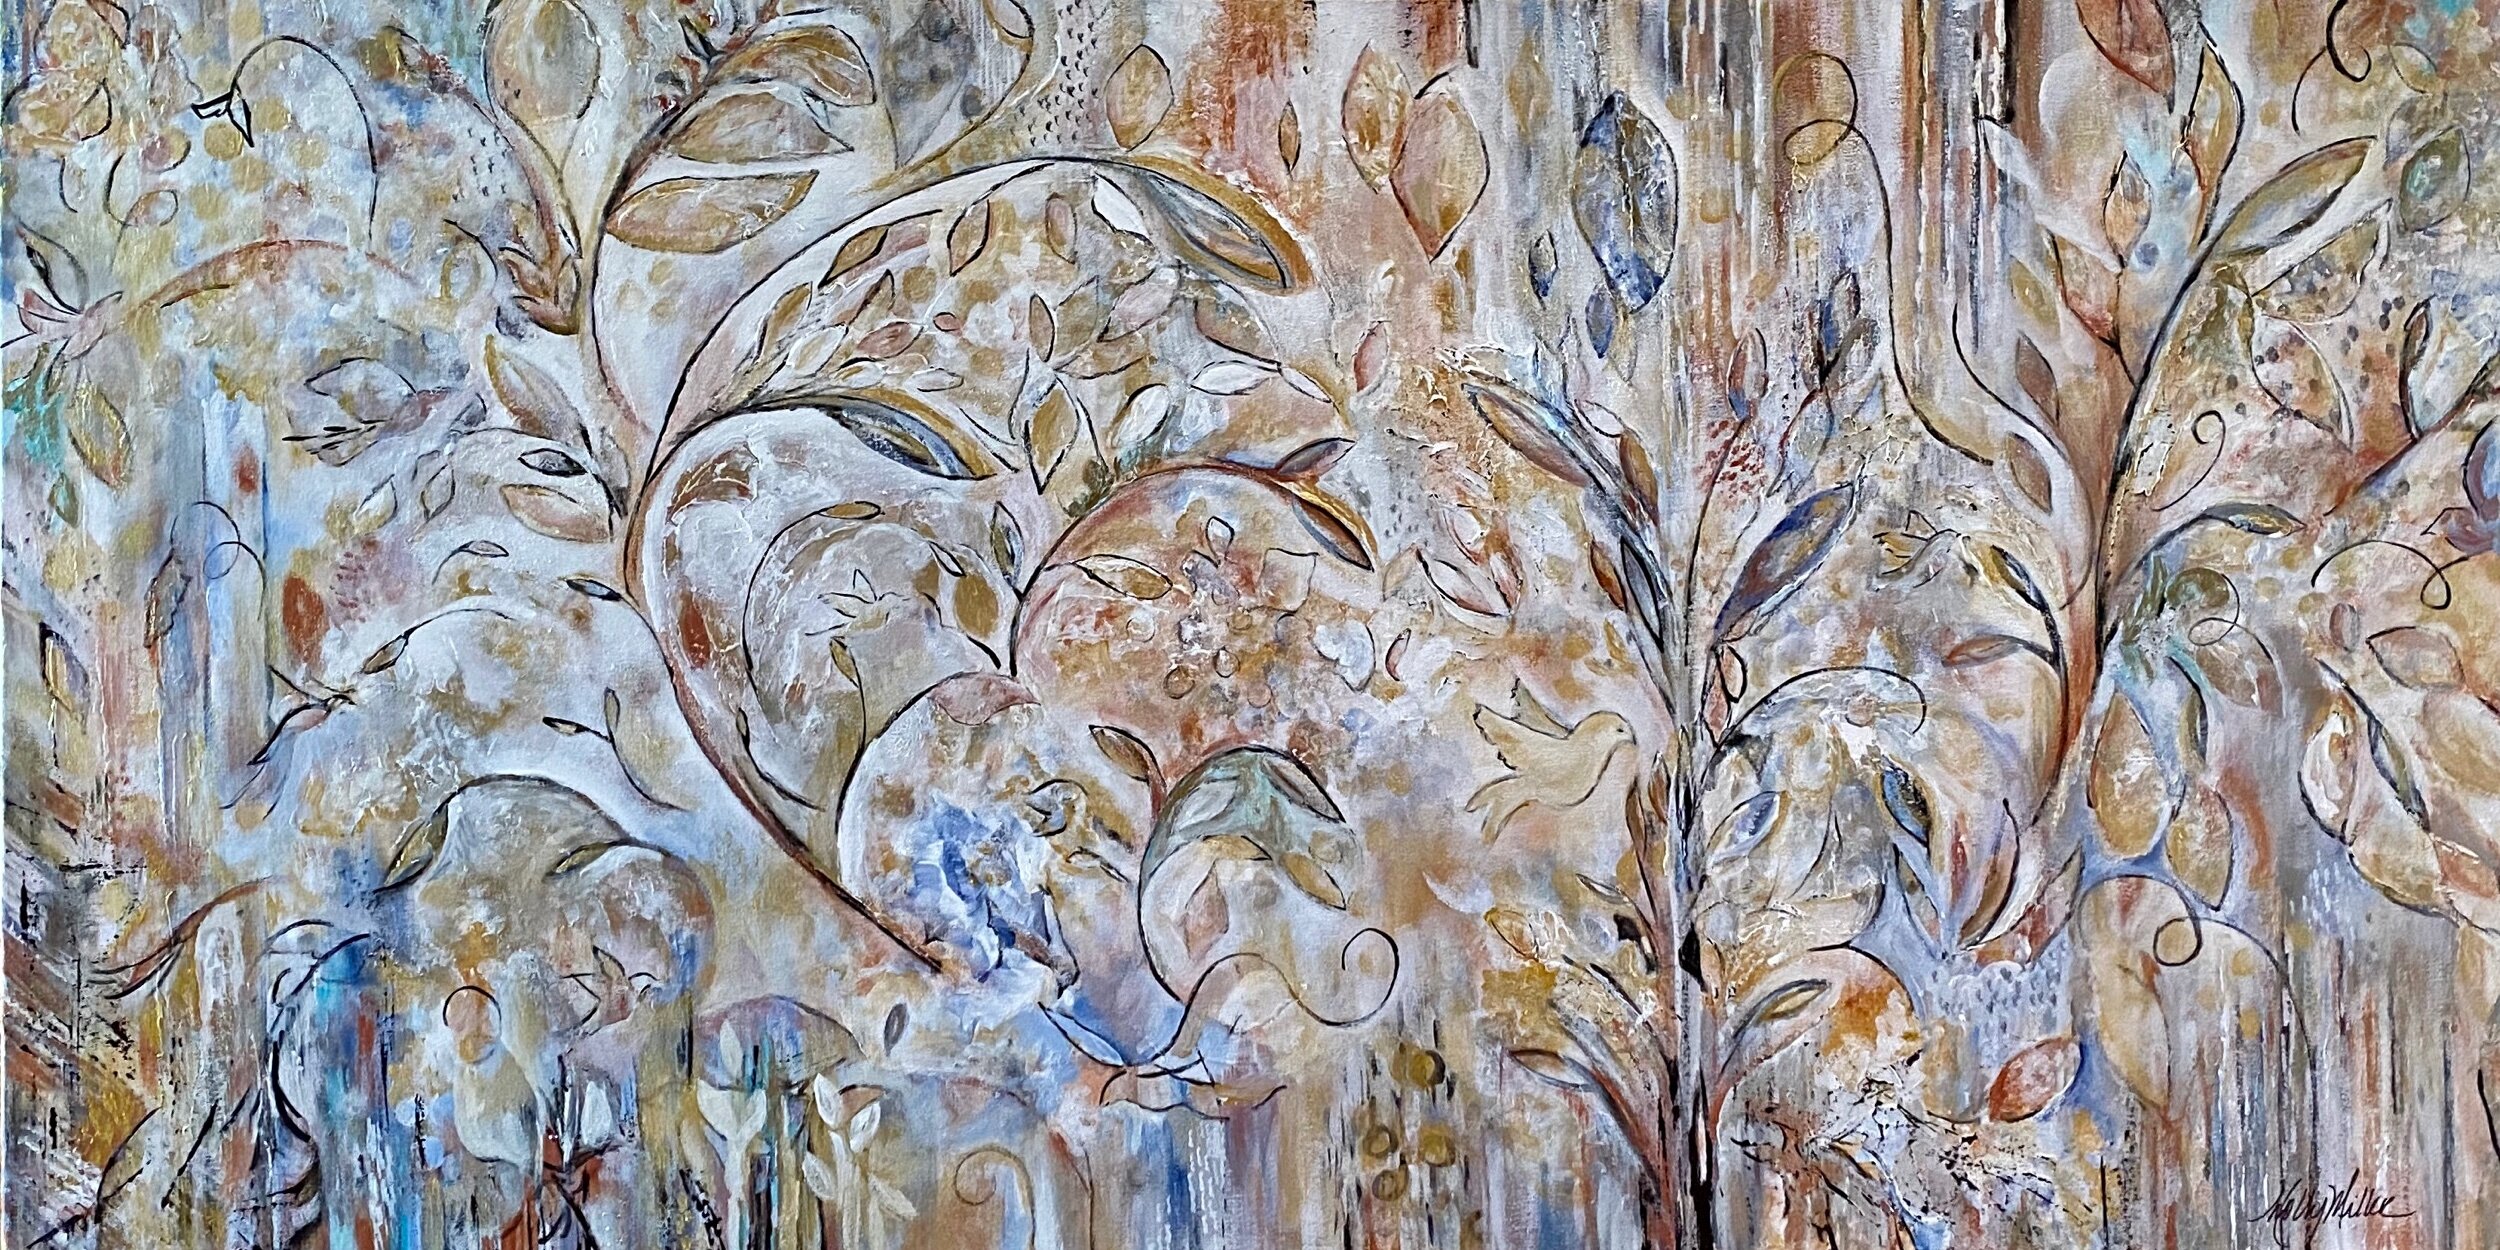   sold &nbsp; 24 x 48 acrylic on canvas with gold, copper, and bronze metallic accents&nbsp; 